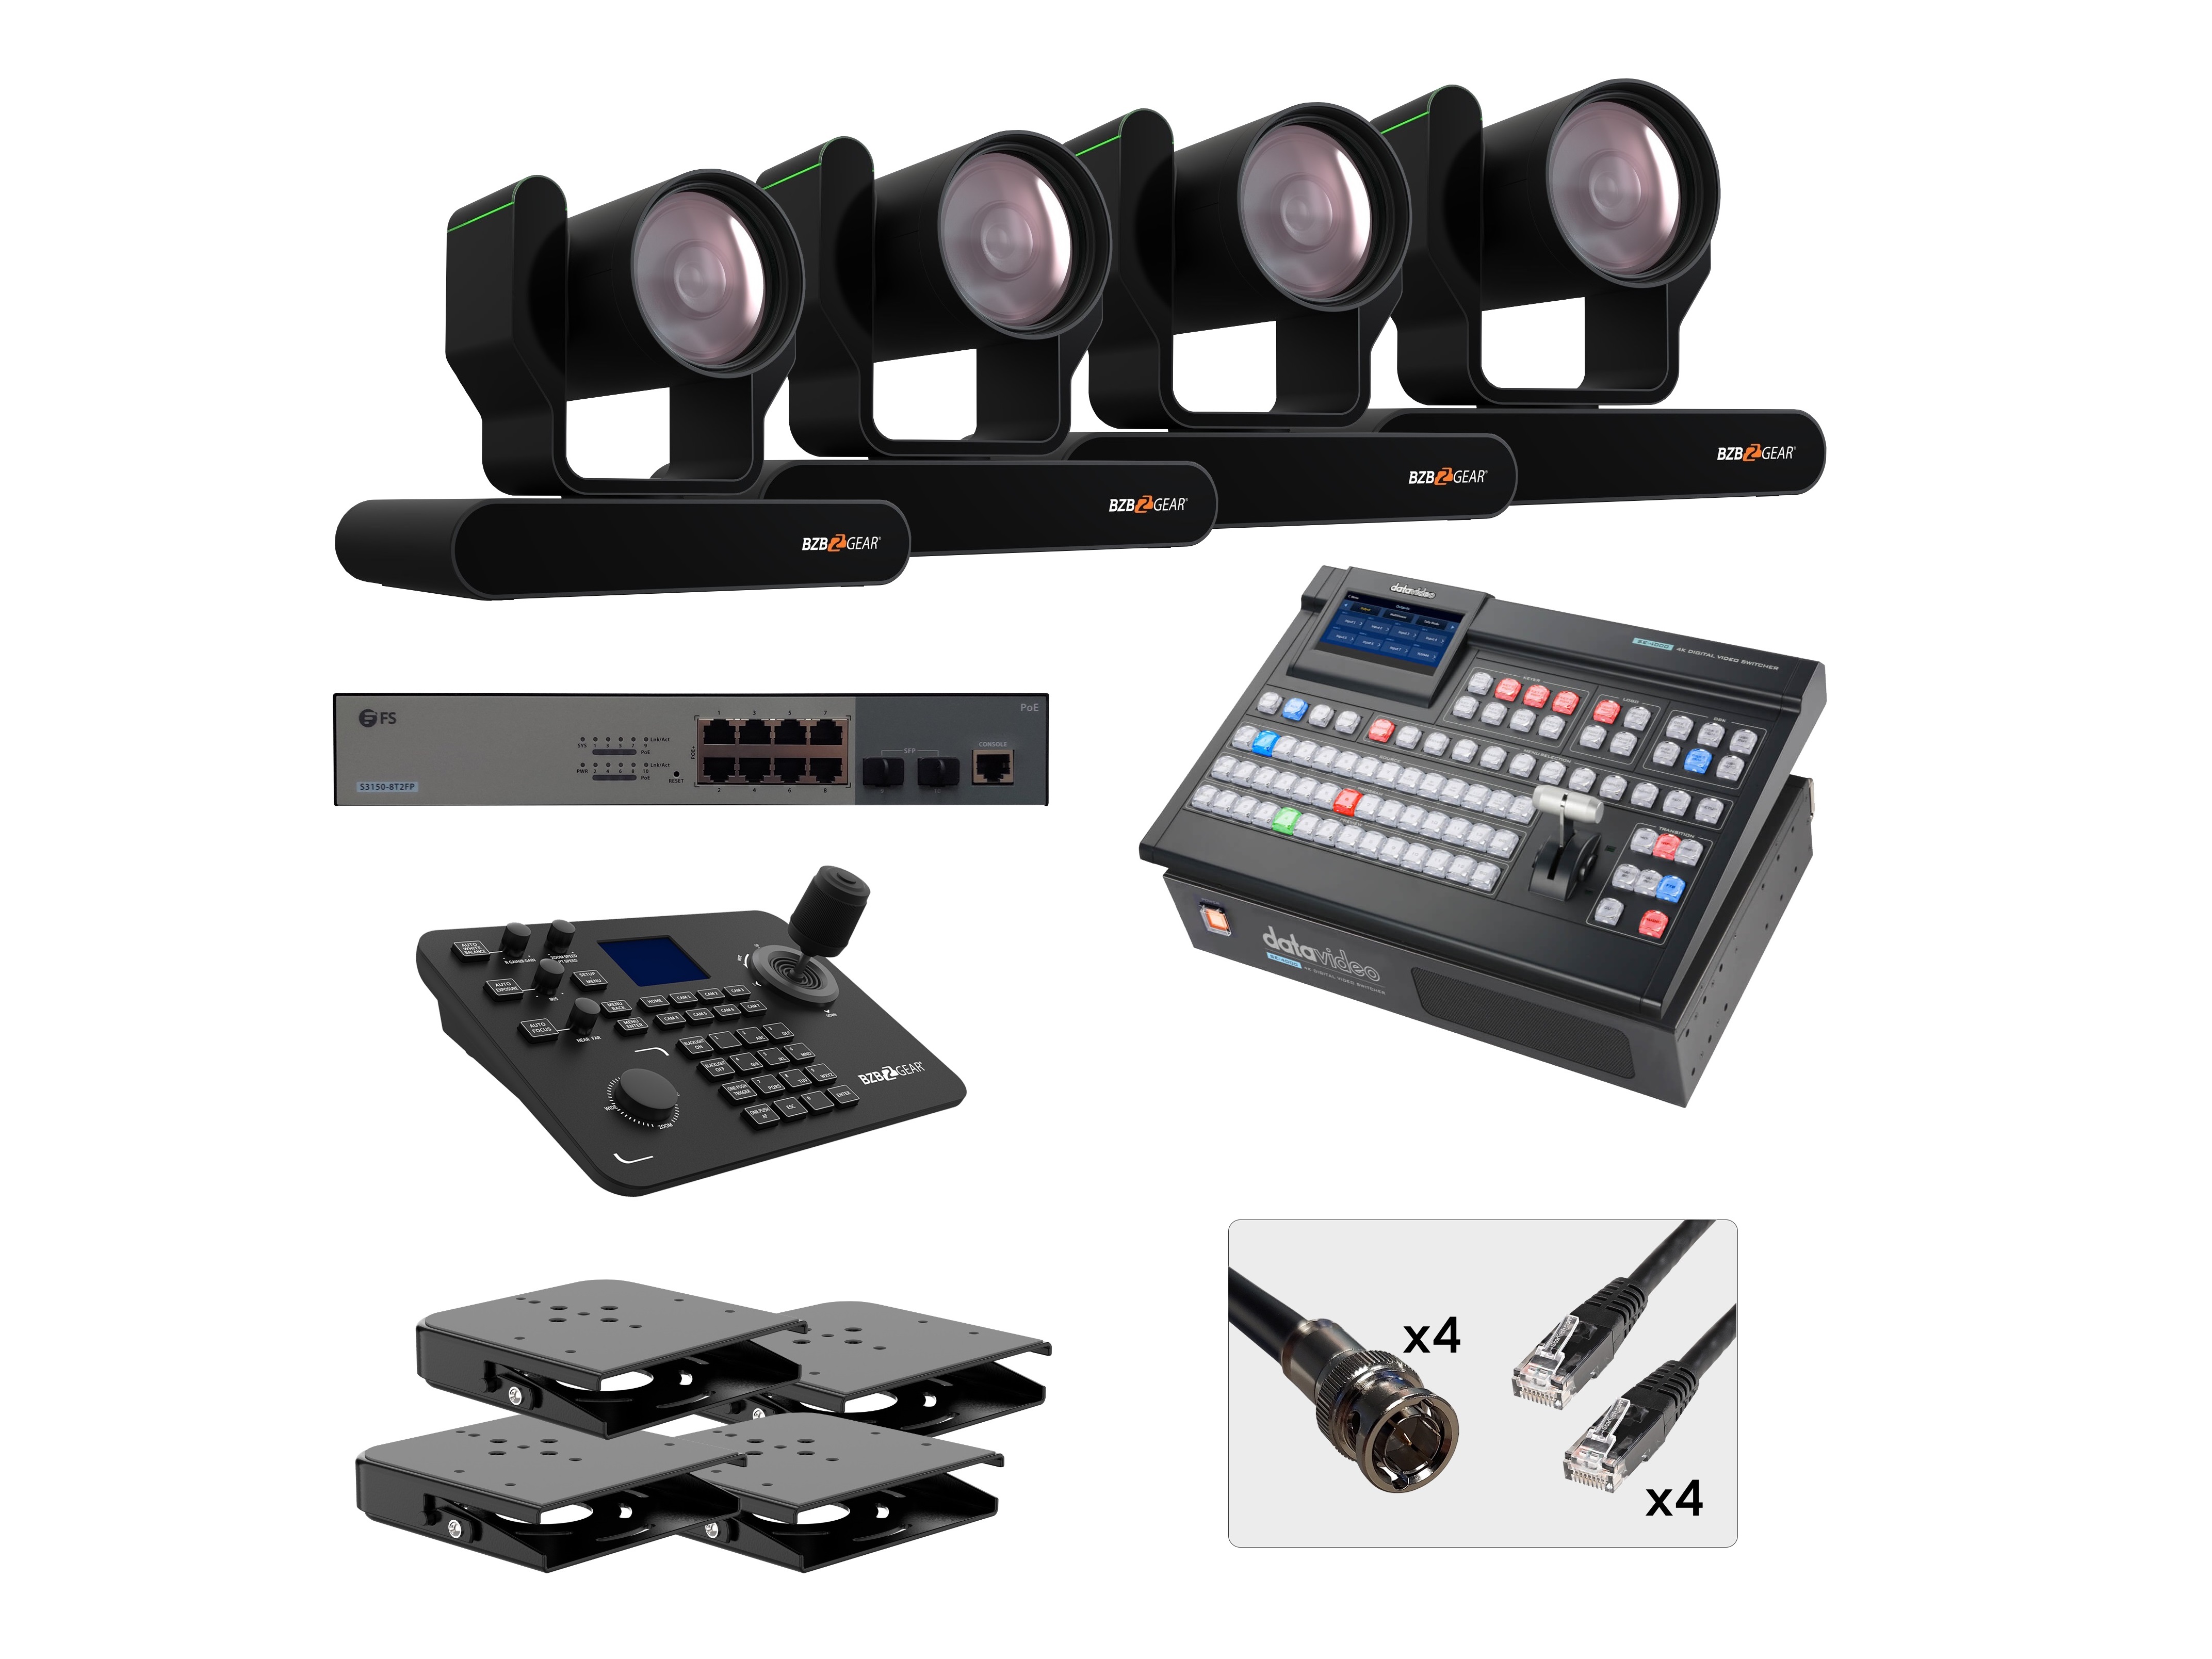 BZB-12G-PRODUCTION-KIT4 All-In-One Single Operator 4K 12G Production Bundle with Four BZBGEAR 25X PTZ Camera/Joystick Controller/DATAVIDEO 4K Mixer/Black Ceiling Mount by BZBGEAR